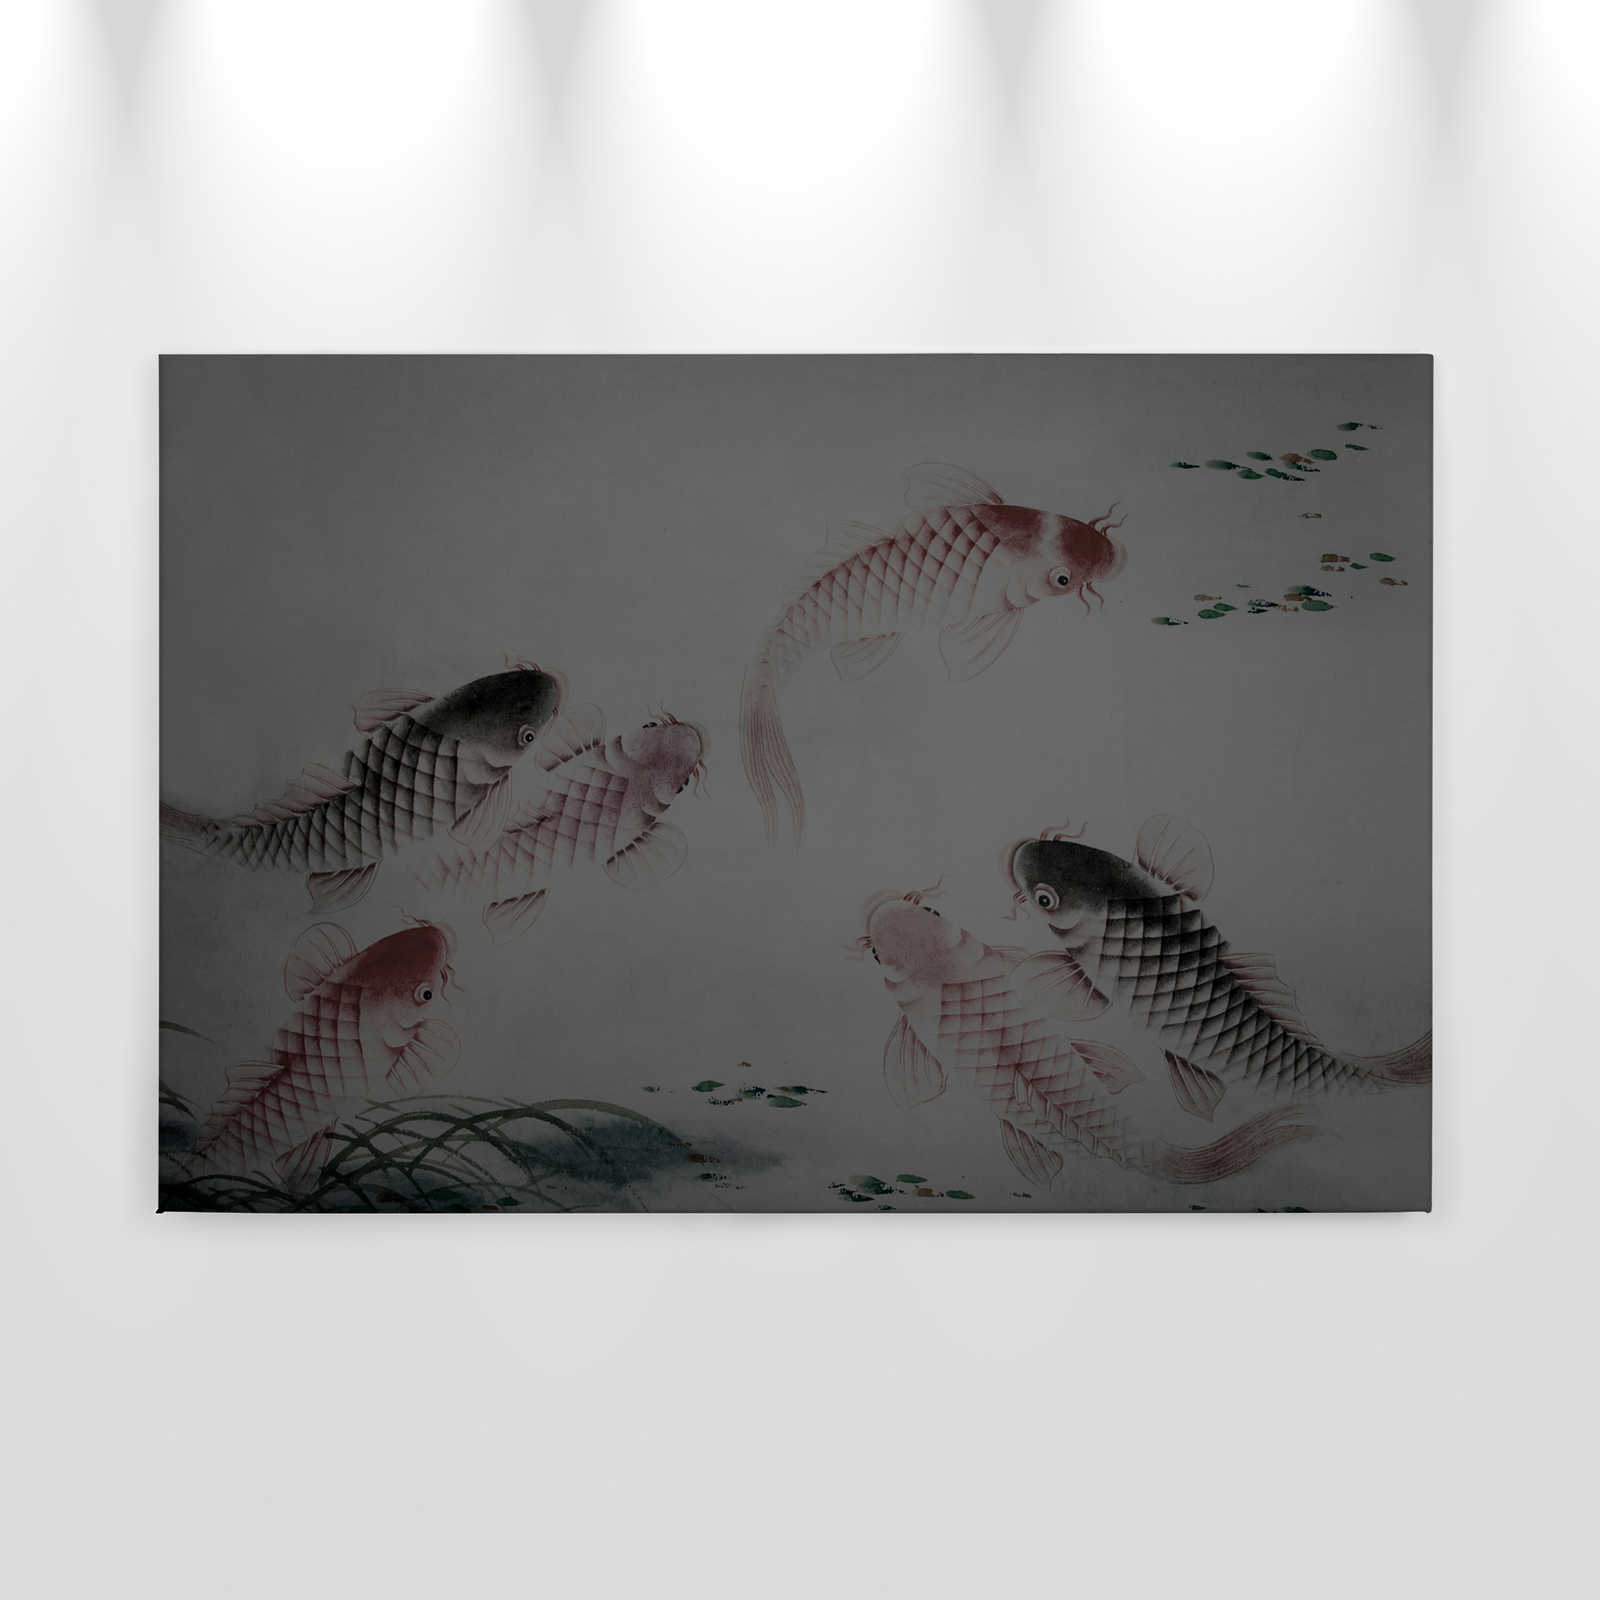             Canvas painting Asia Style with Koi pond | grey - 0,90 m x 0,60 m
        